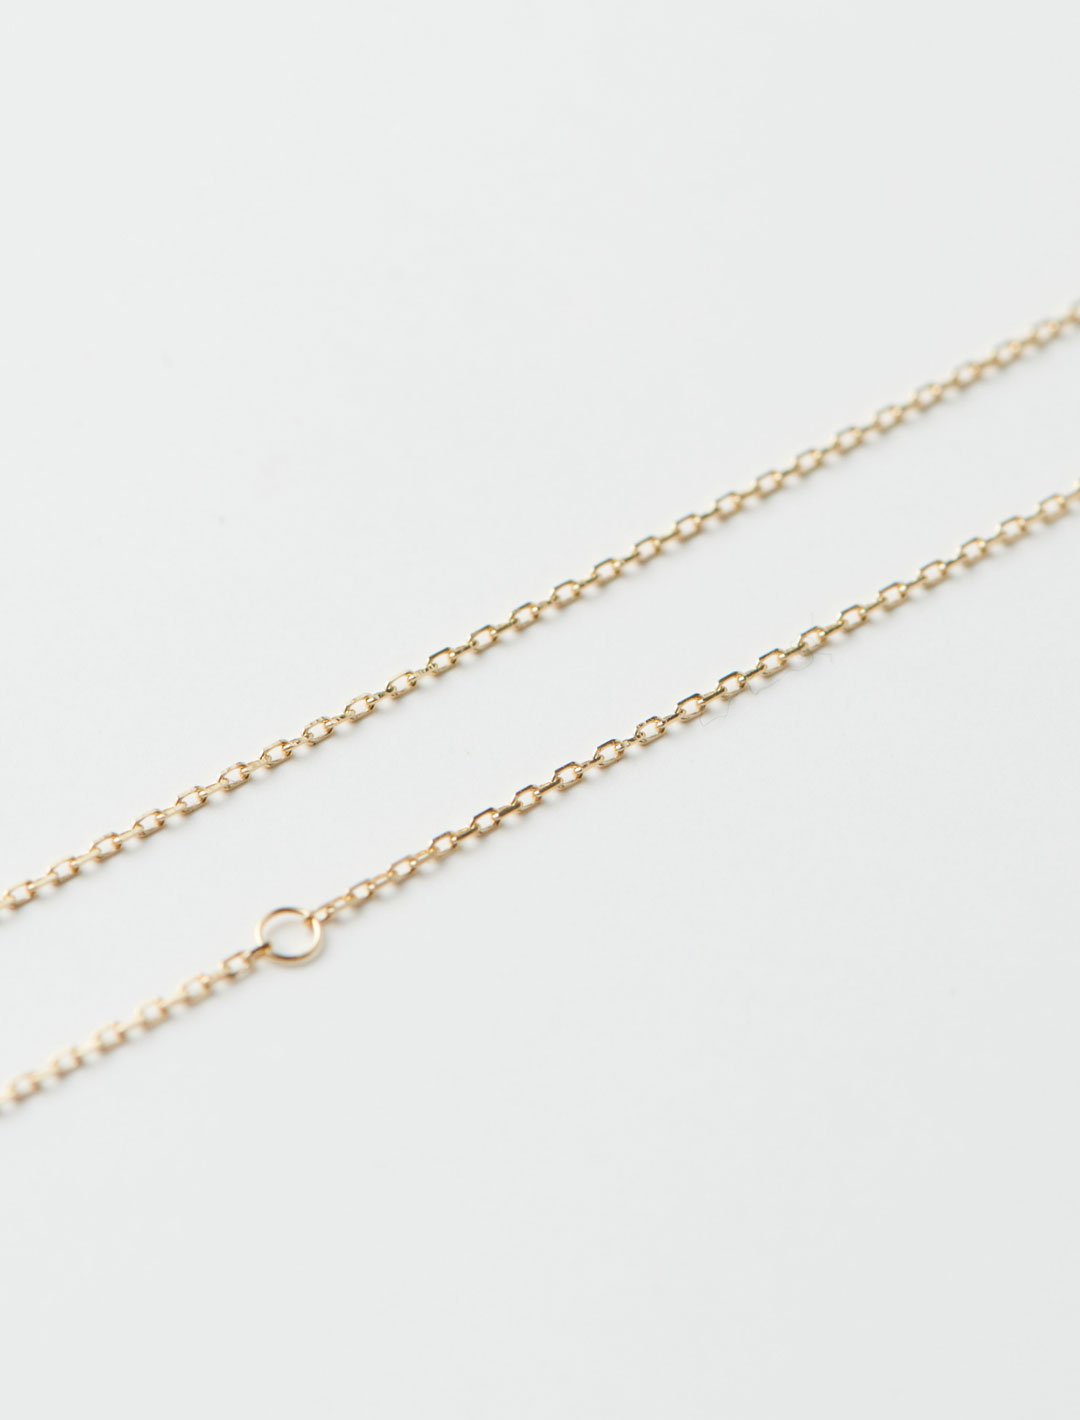 MIRROR Necklace S 45cm - Yellow Gold